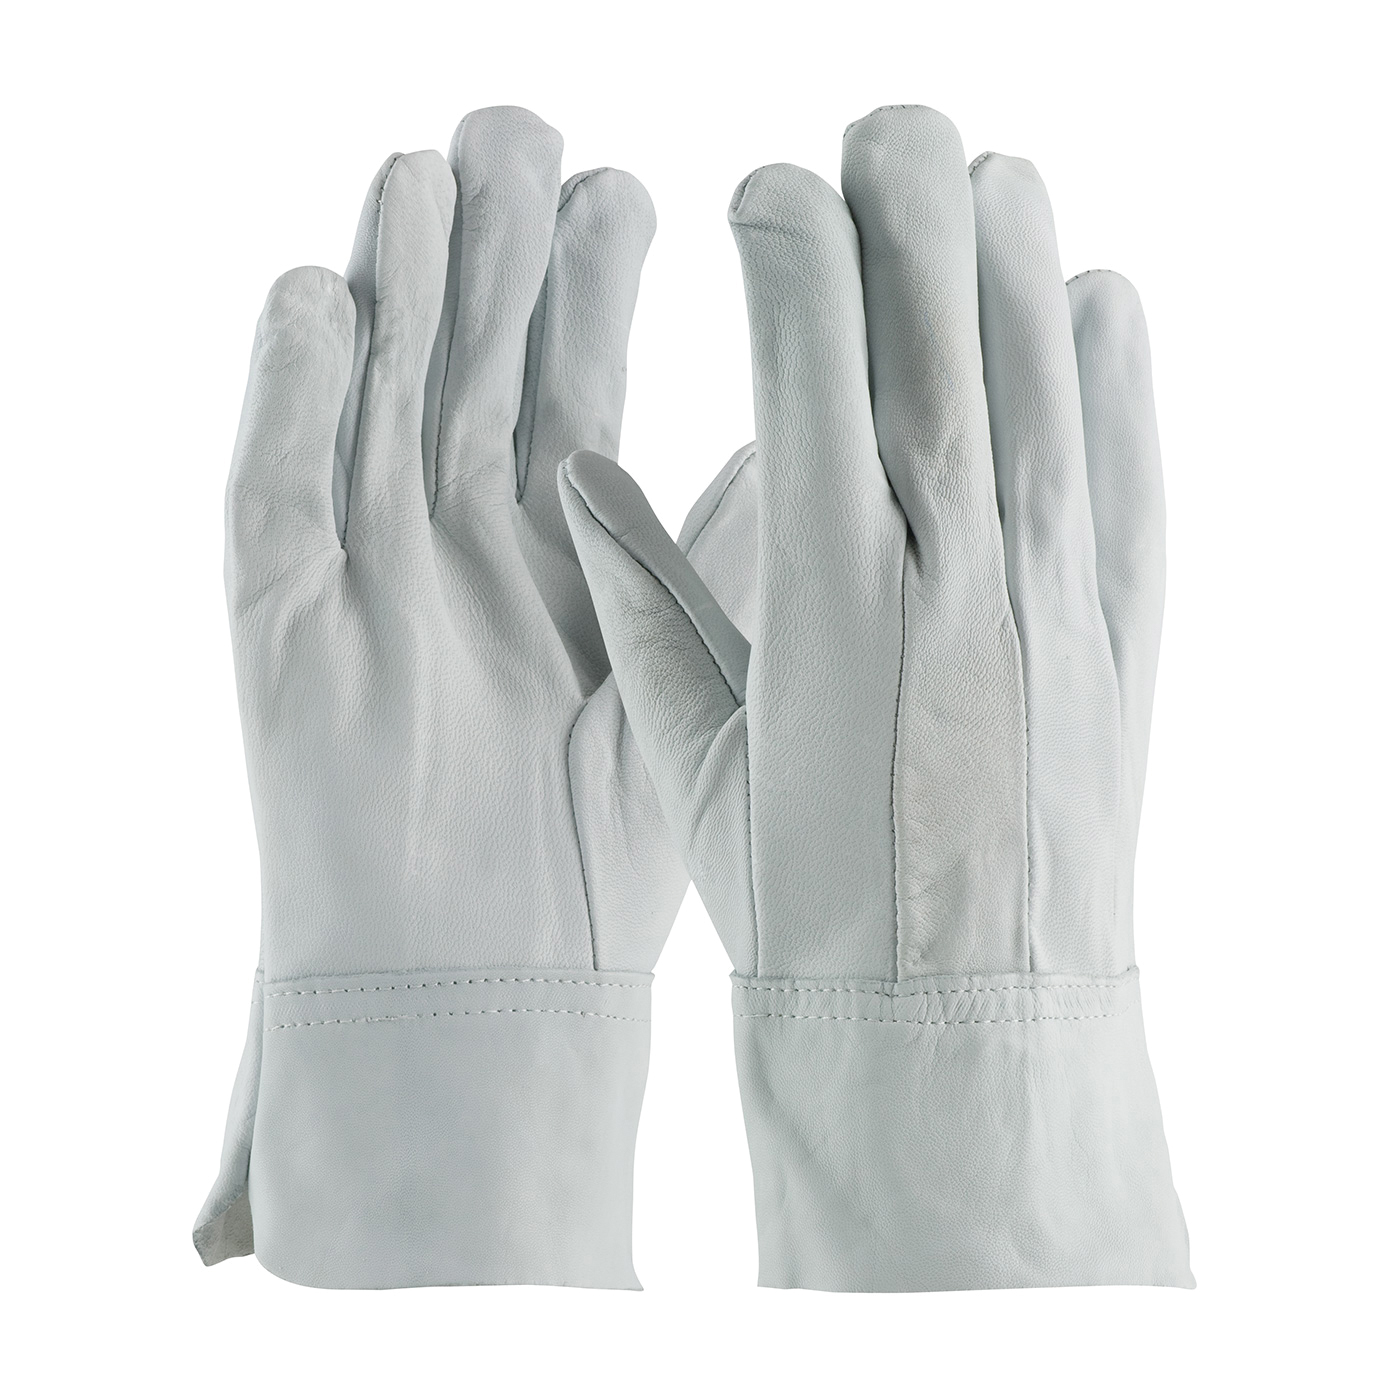 PIP® 75-4904/M MIG/TIG Welding Gloves, M, Top Grain Goat Skin Leather, Gray, Unlined Lining, Band Top/Slip-On Cuff, 9.7 in L, 1.1 mm THK Glove Material